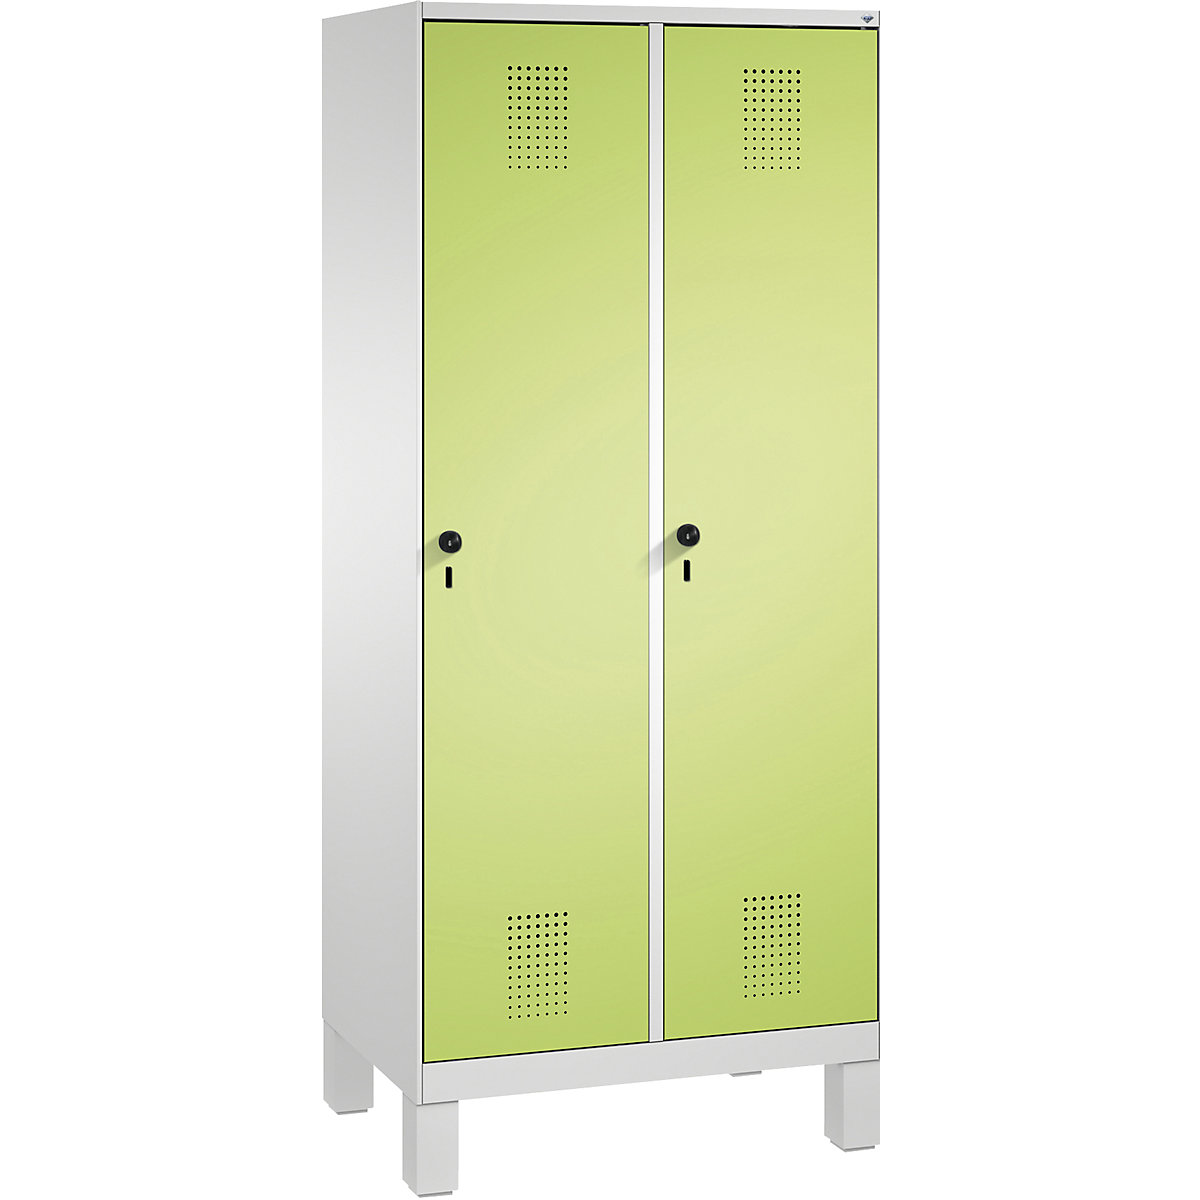 EVOLO cloakroom locker, with feet – C+P, 2 compartments, compartment width 400 mm, light grey / viridian green-3